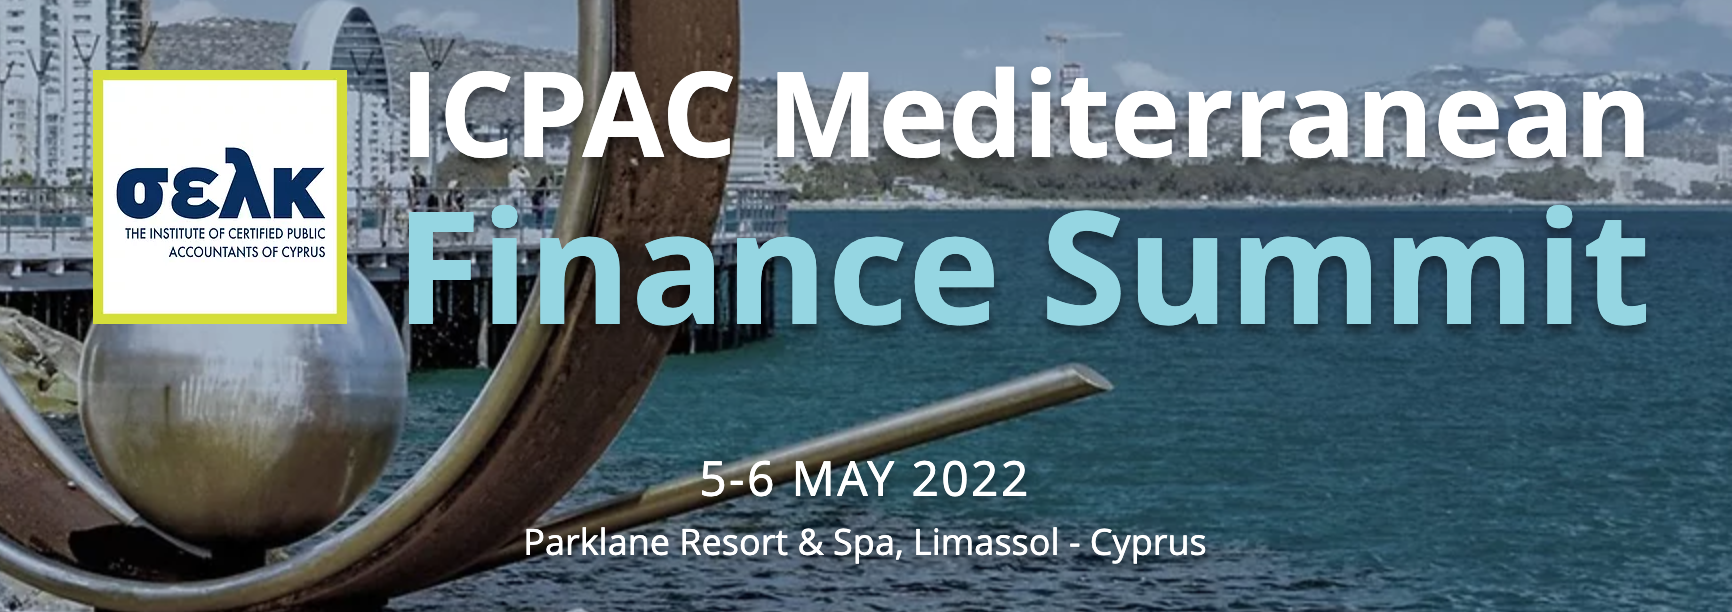 Finance Leaders Gathered at the ICPAC Mediterranean Finance Summit in Cyprus